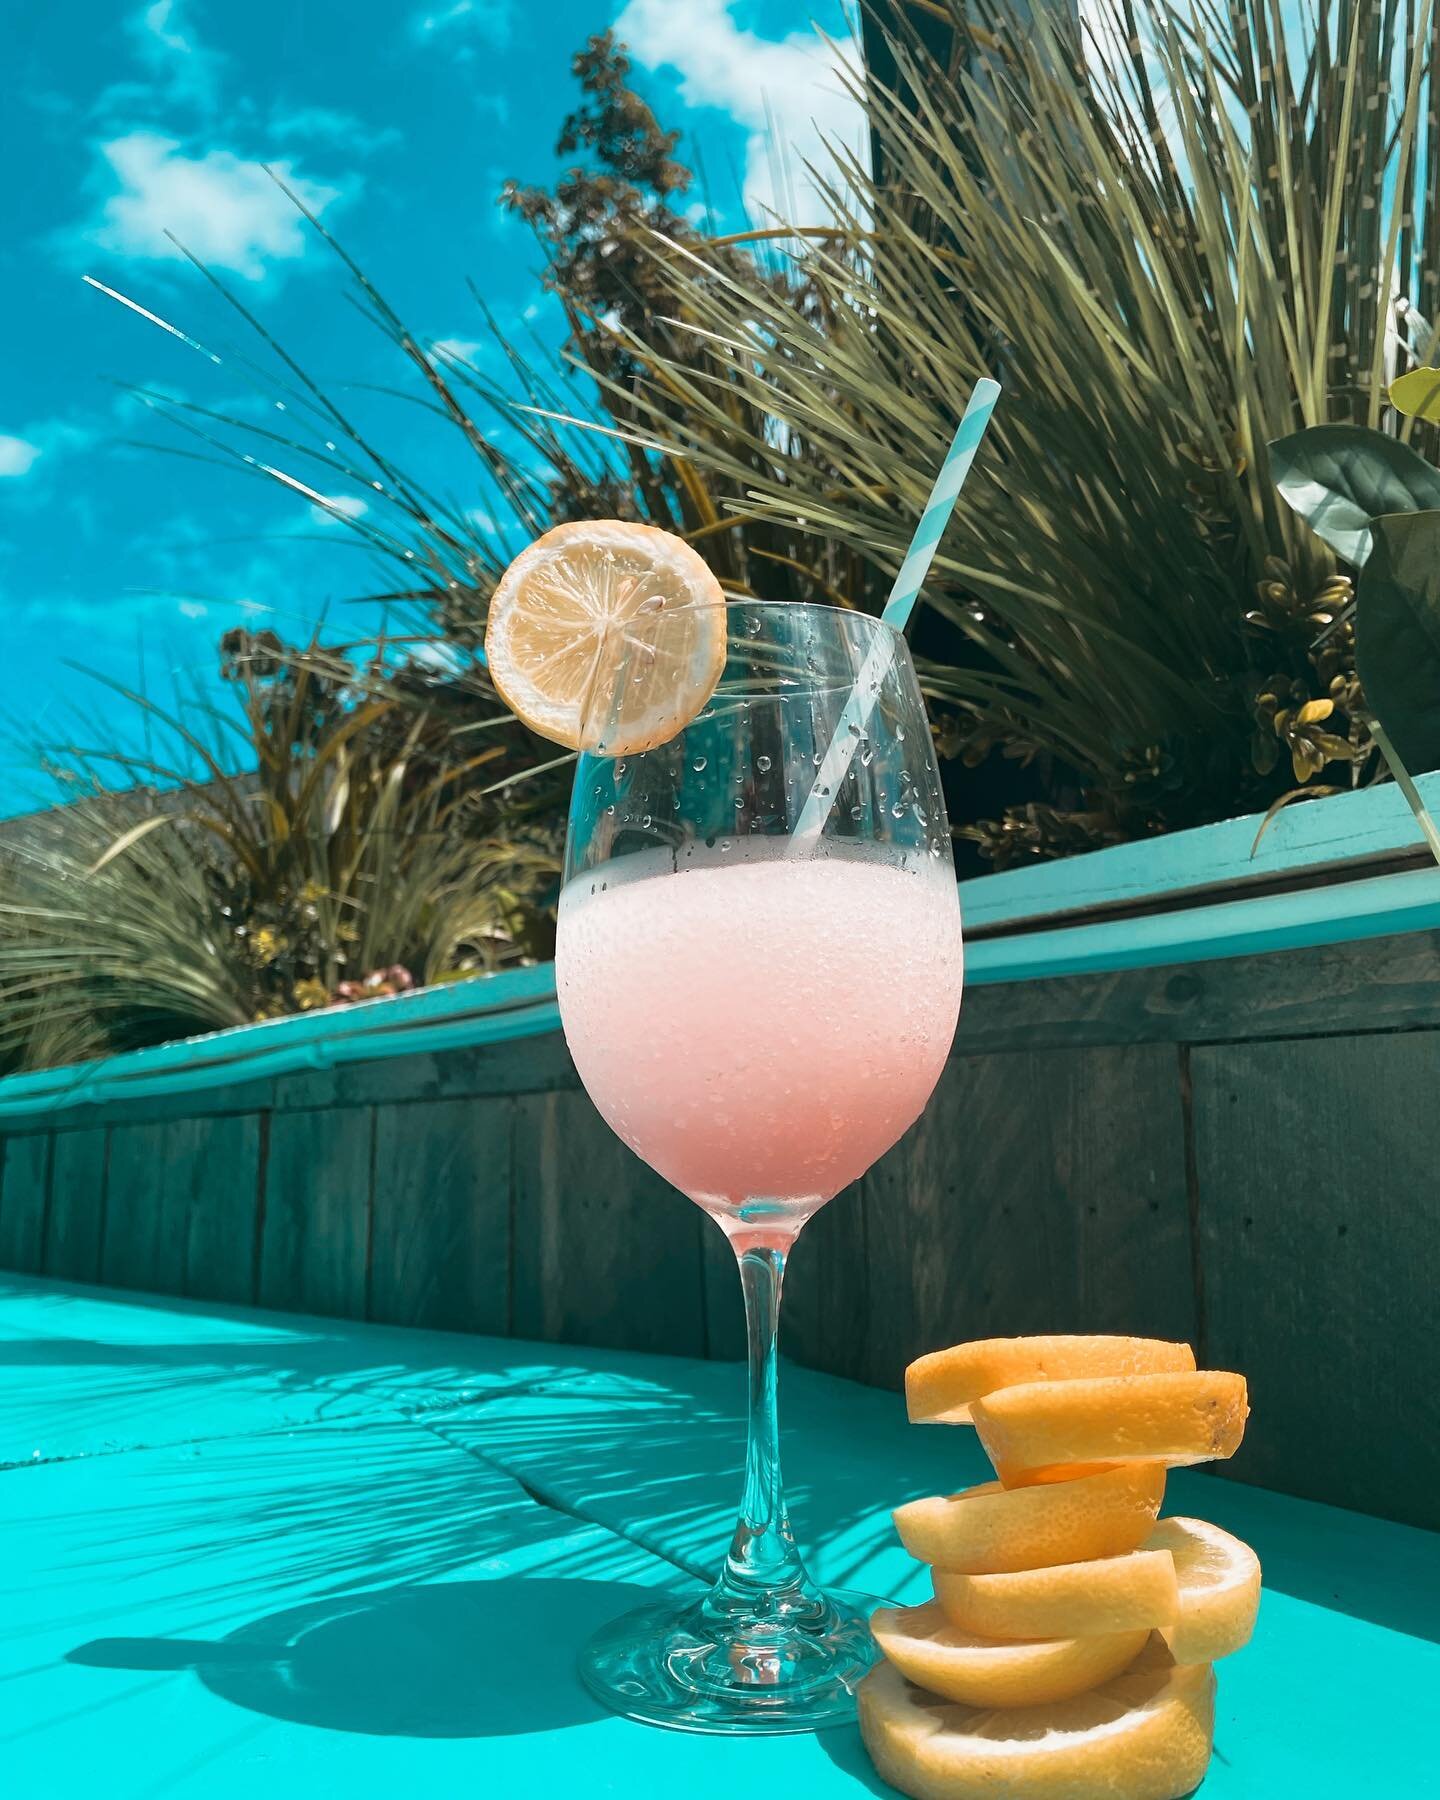 When life gives you lemons,  make pink lemonade &amp; add vodka to create a dreamy slushy! The lemon squeezy has made its summer debut! Come try it out! 🍋 🌴 #asburyalehouse